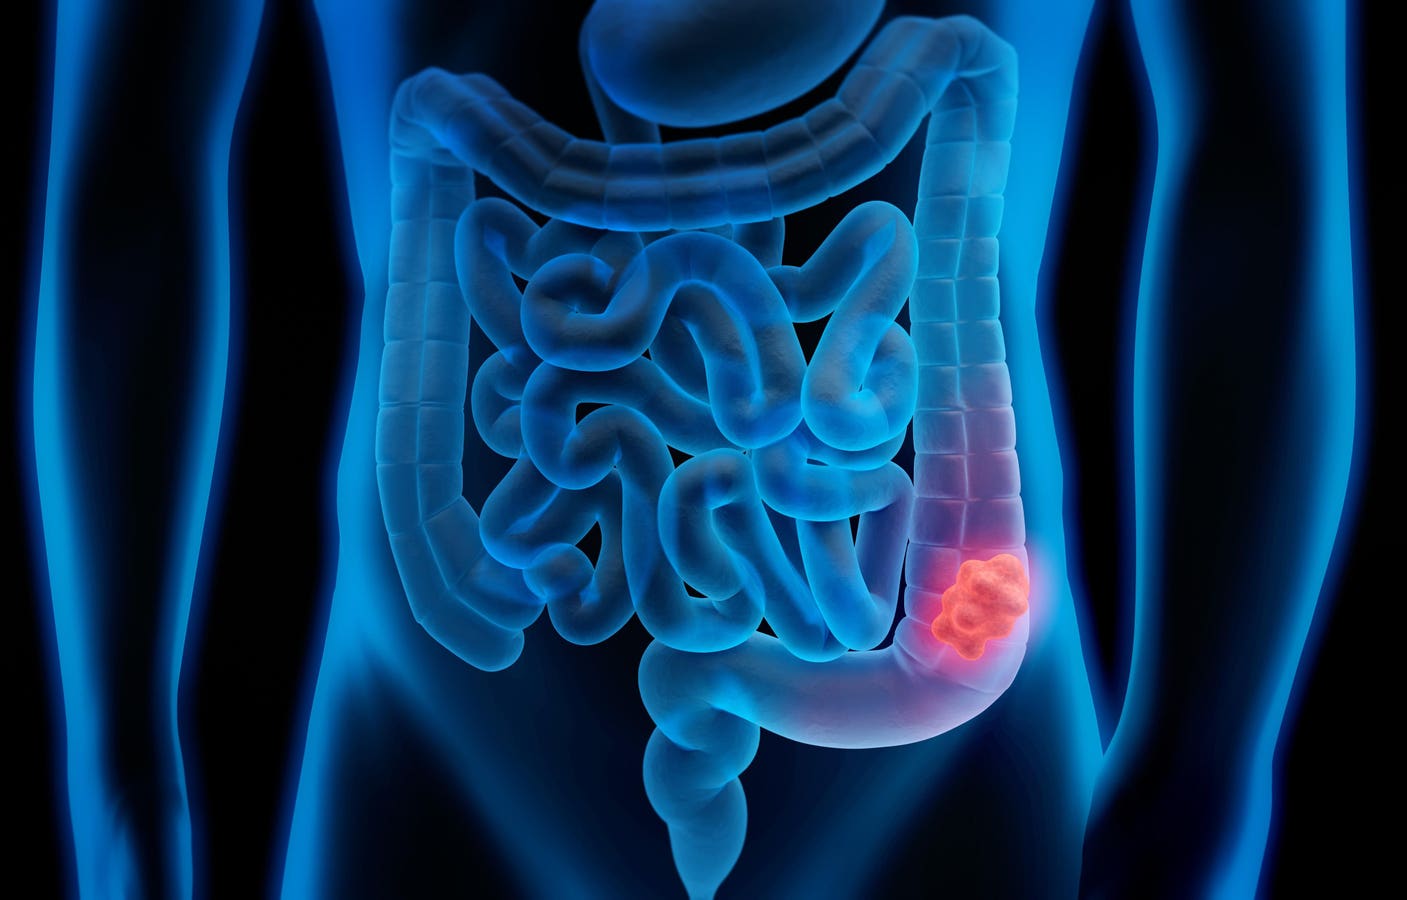 Phase 2 study shows that Opdivo-Yervoy is highly effective against colon cancer